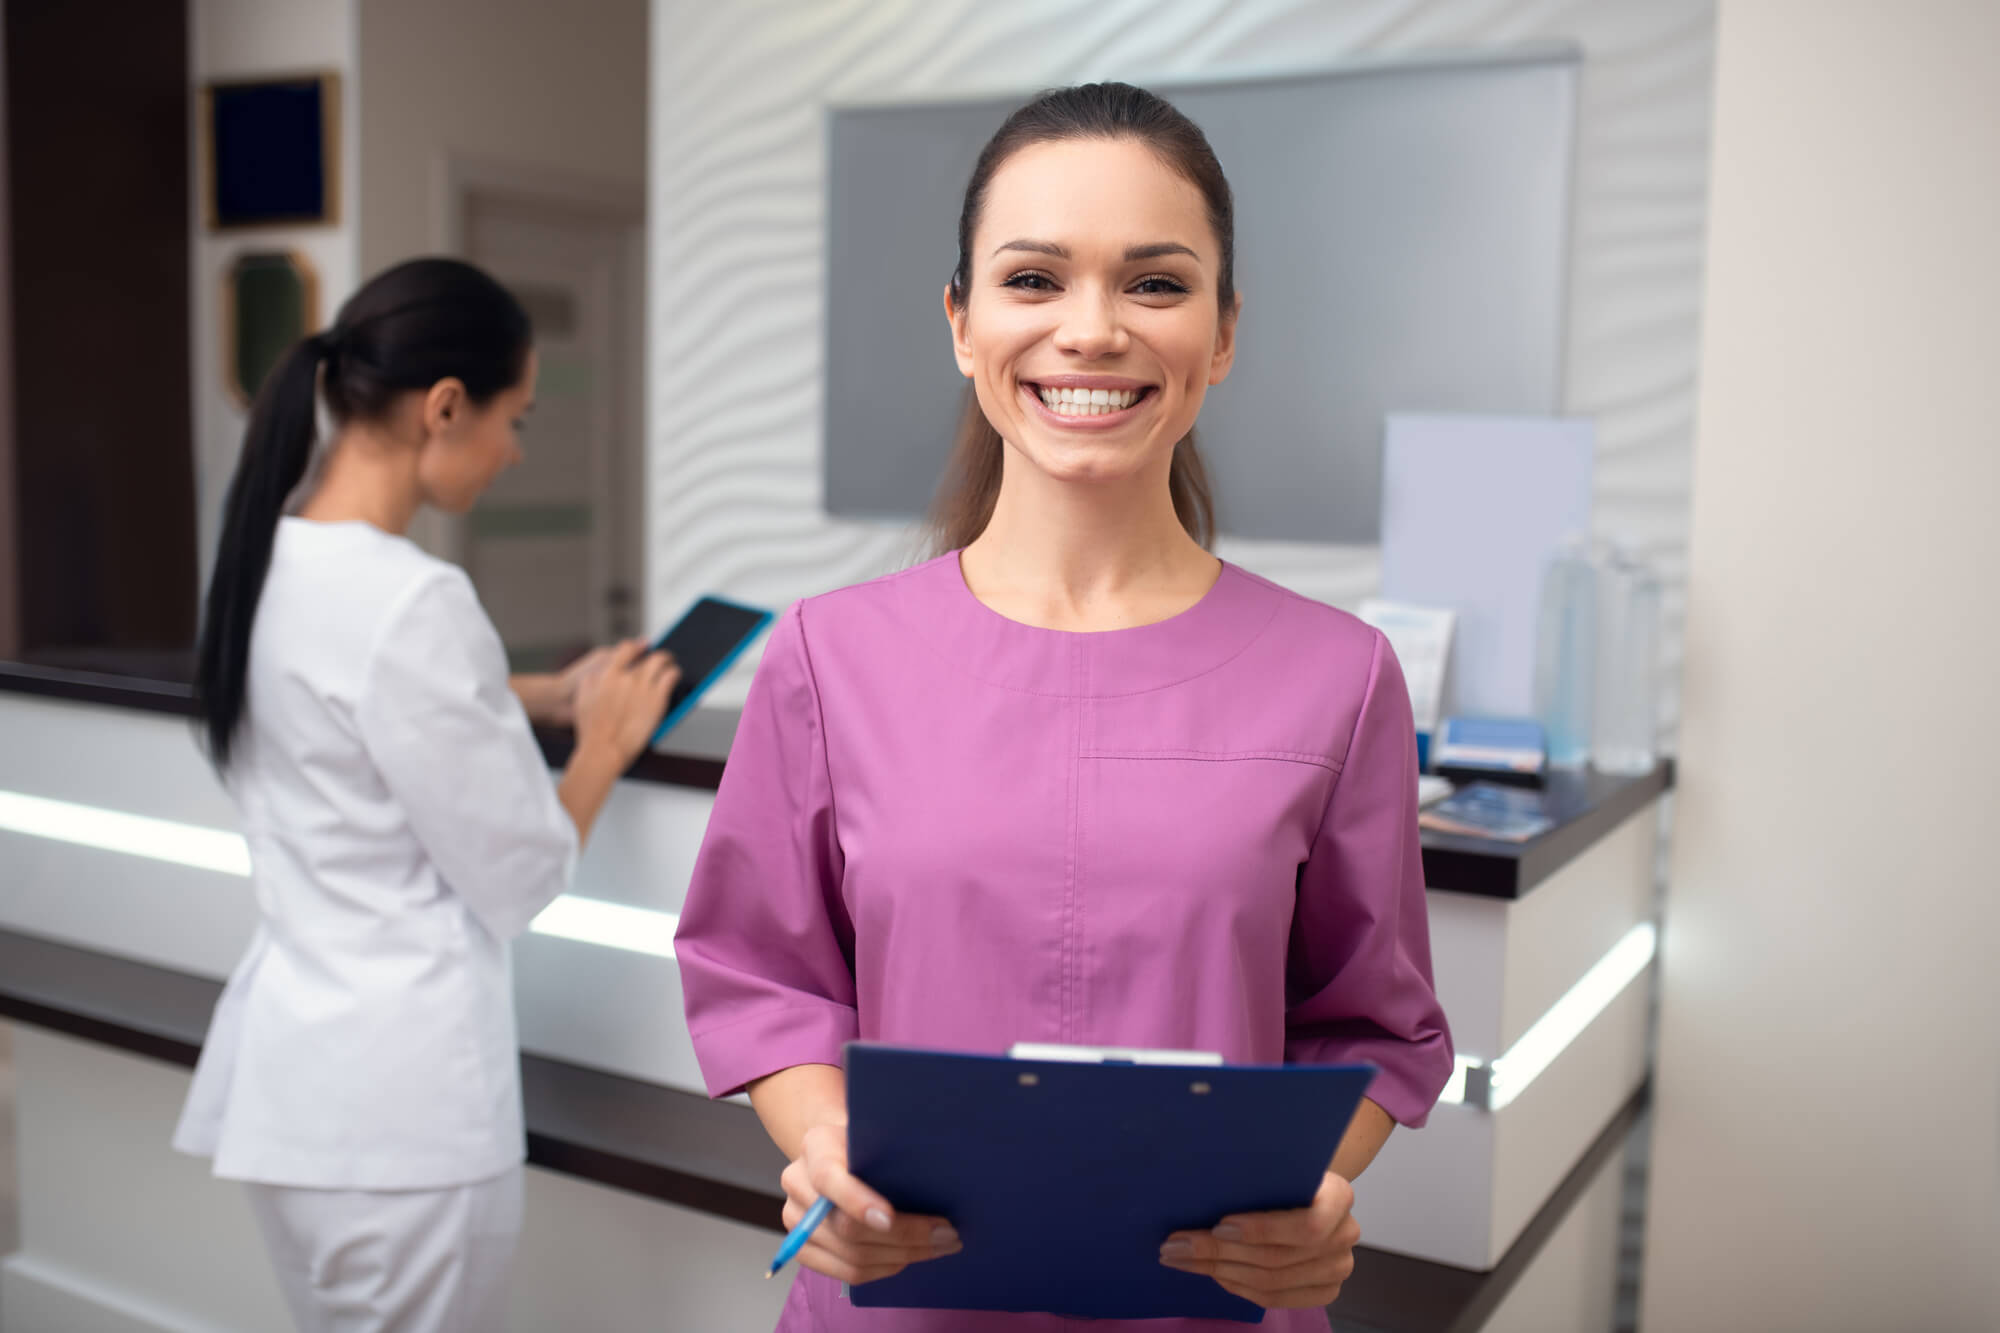 Smiling broadly. Beaming woman wearing uniform working in dental clinic smiling broadly